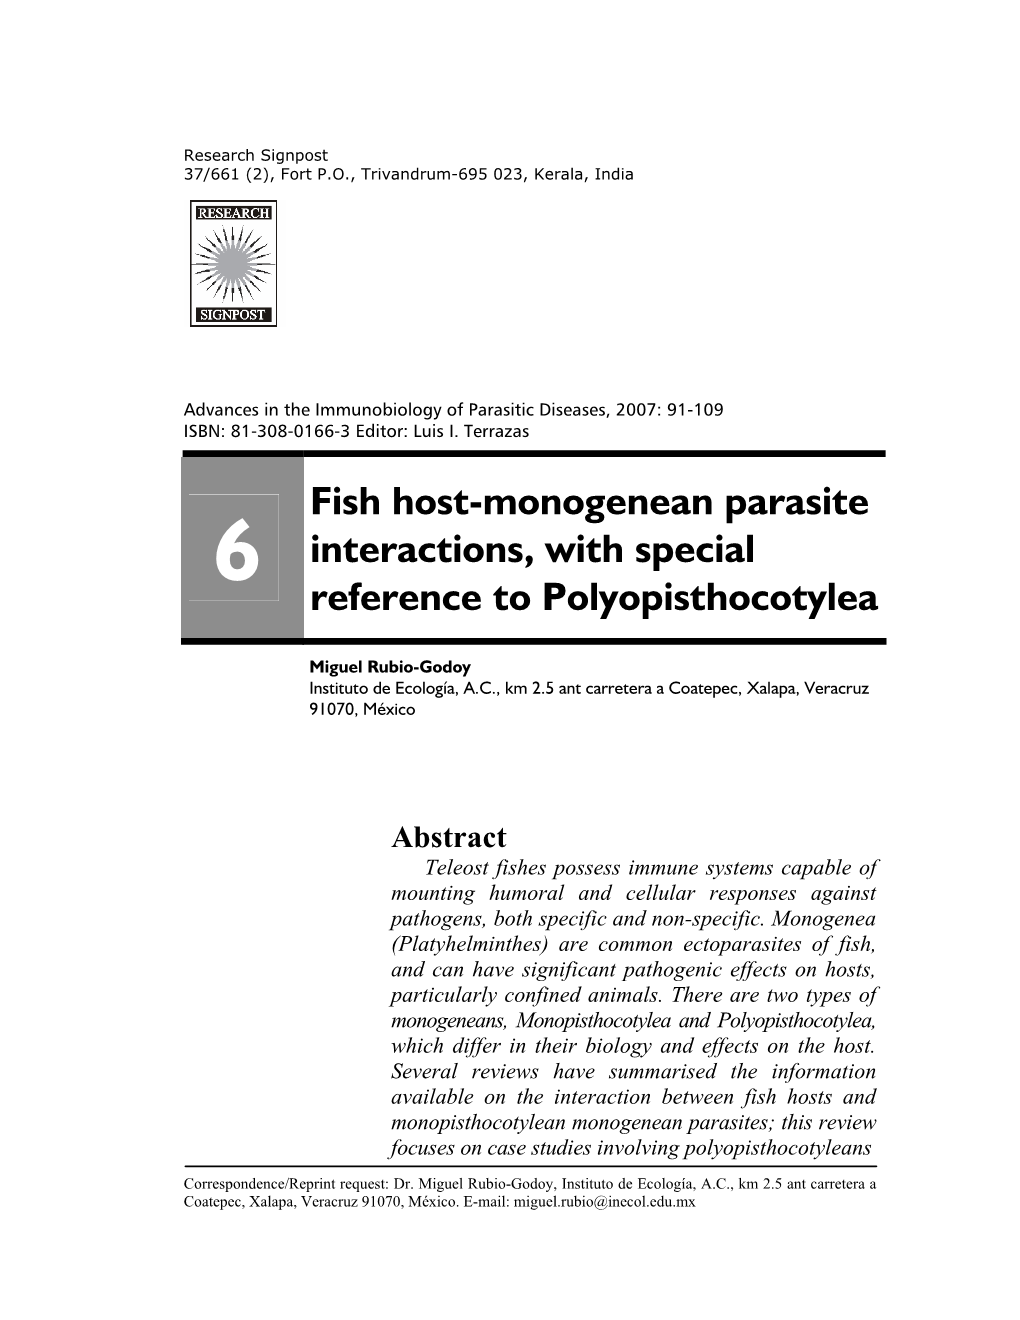 Fish Host-Monogenean Parasite Interactions, with Special Reference